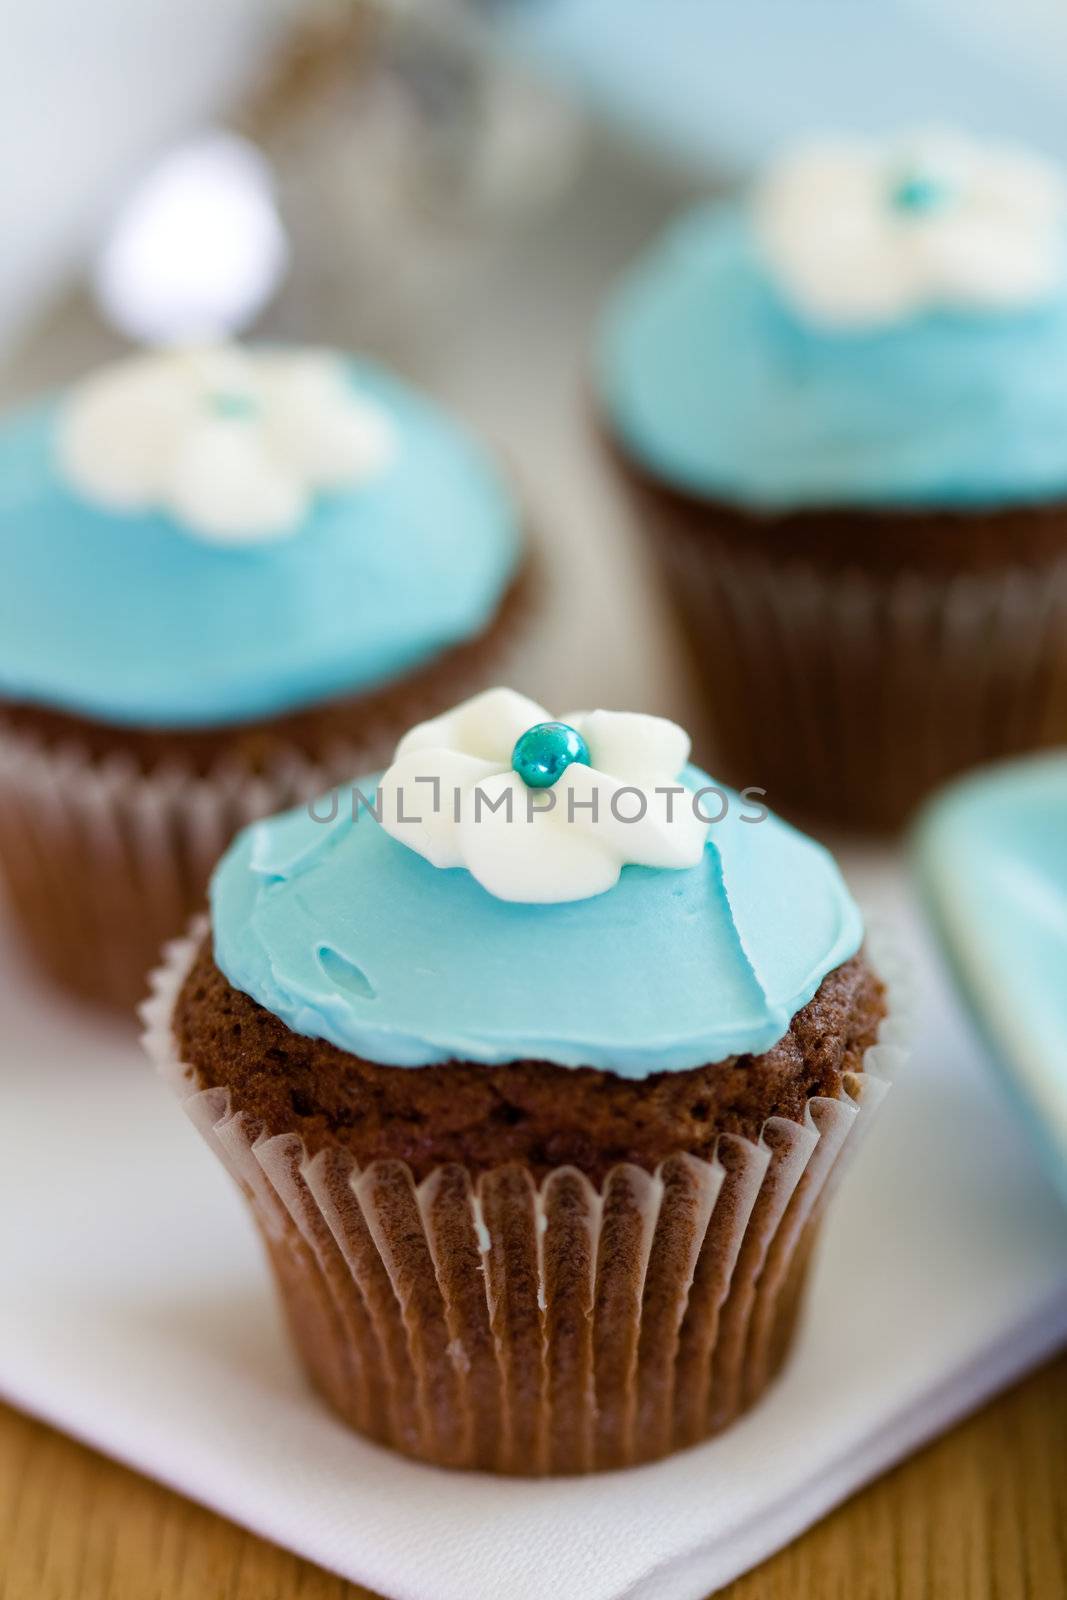 Cupcakes decorated with blue frosting and sugar flowers